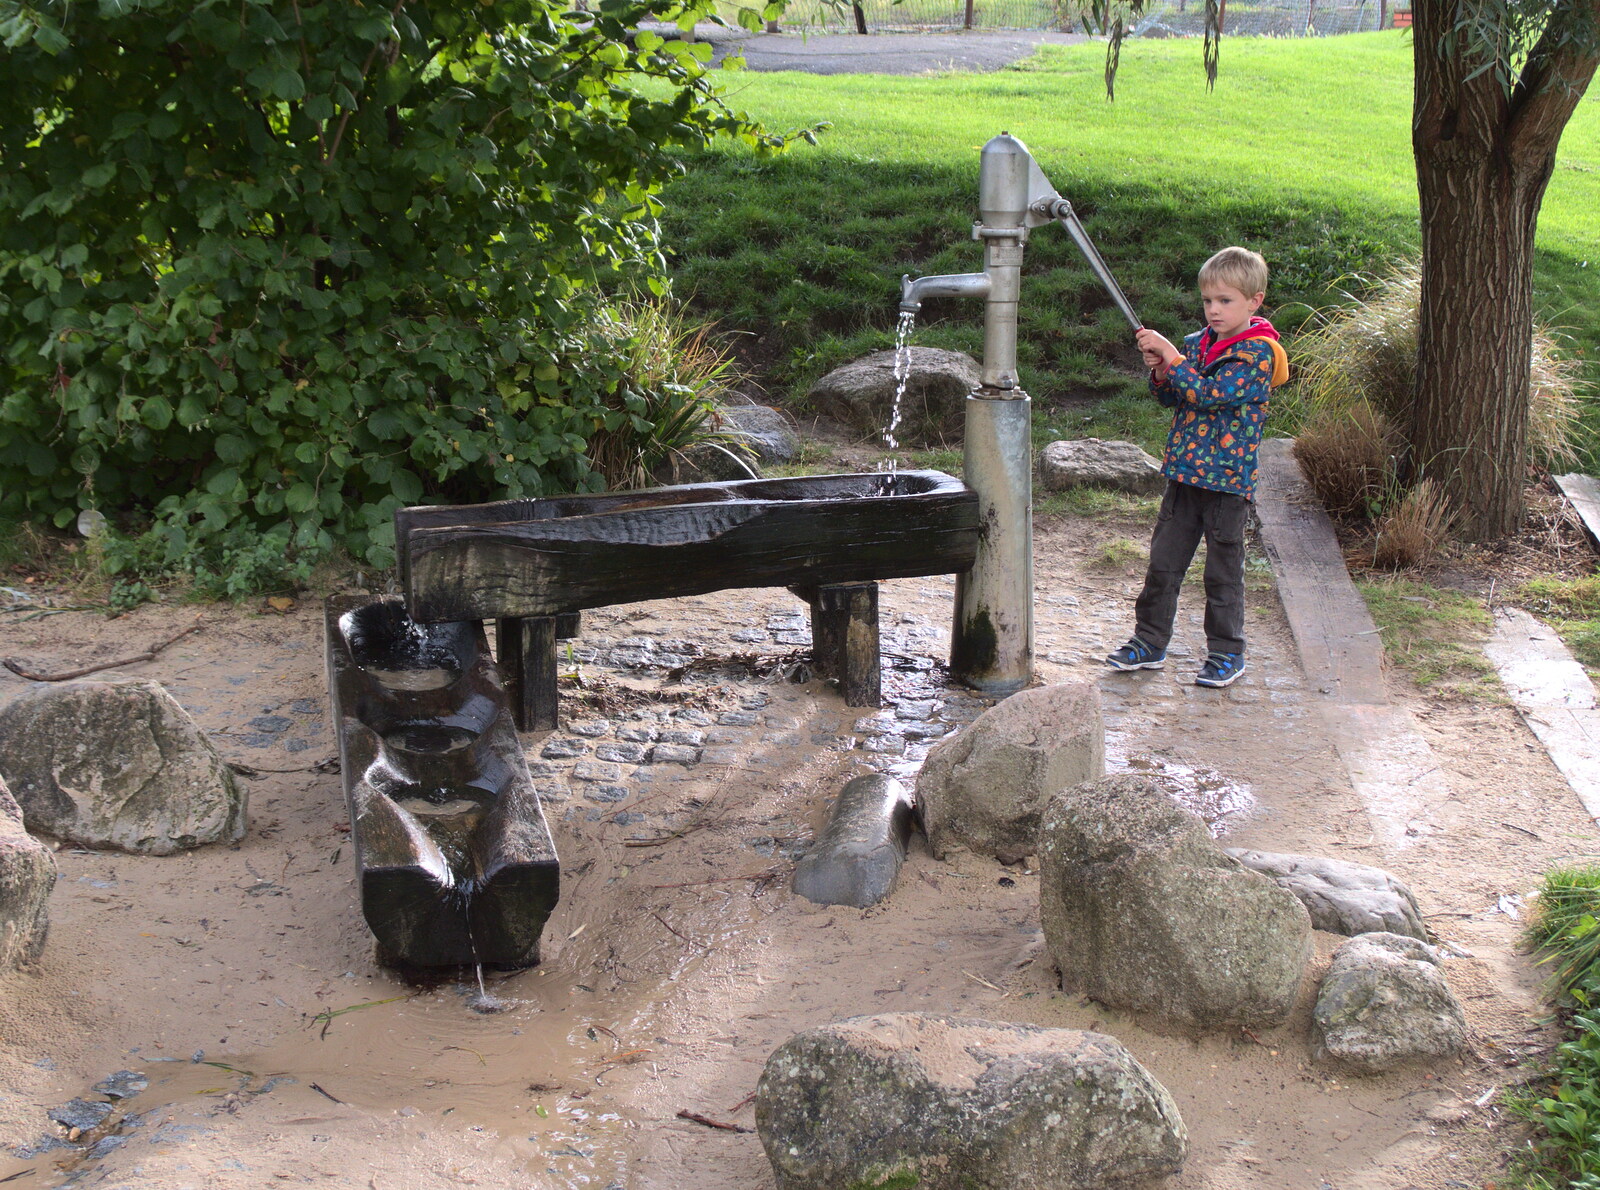 Harry's enjoying the water pump in Abbey Gardens from Ploughing and Pizza, Thrandeston and Bury St. Edmunds, Suffolk - 17th September 2017